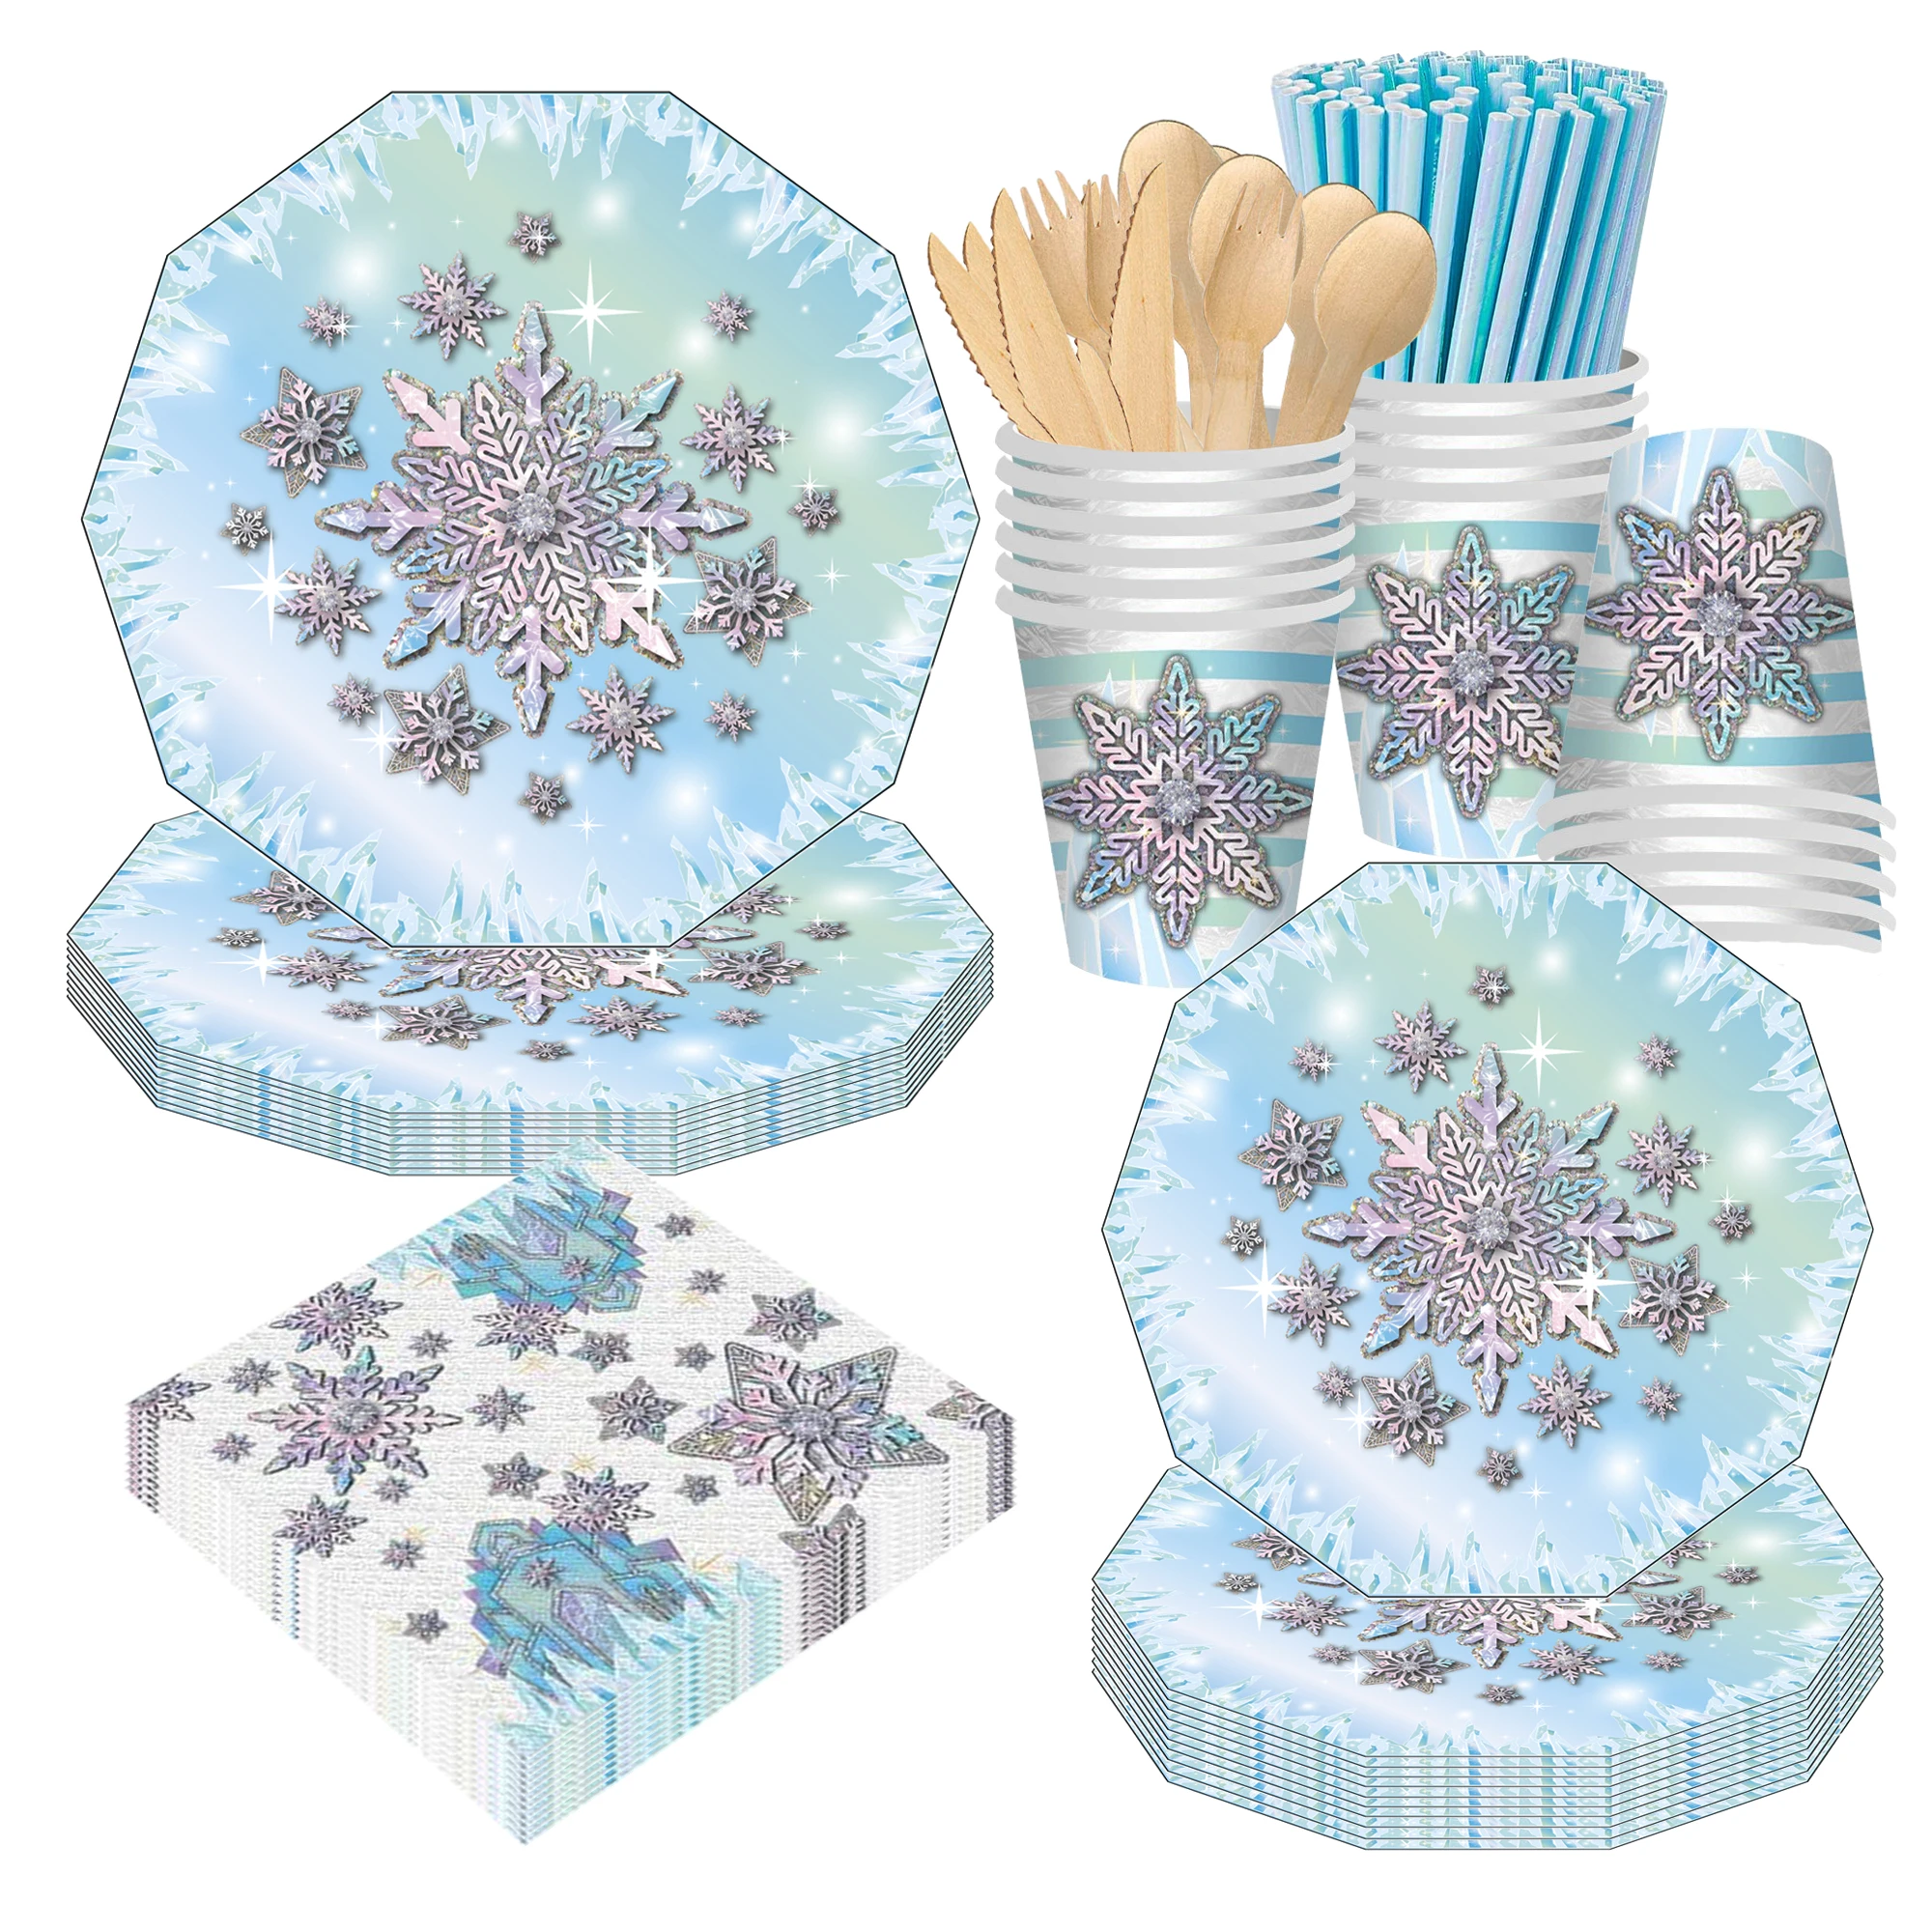 

New Frozen Party Decor Snowflake Theme Disposable Tableware Sets Paper Plate Straw Napkins Merry Christmas Decorations for Home